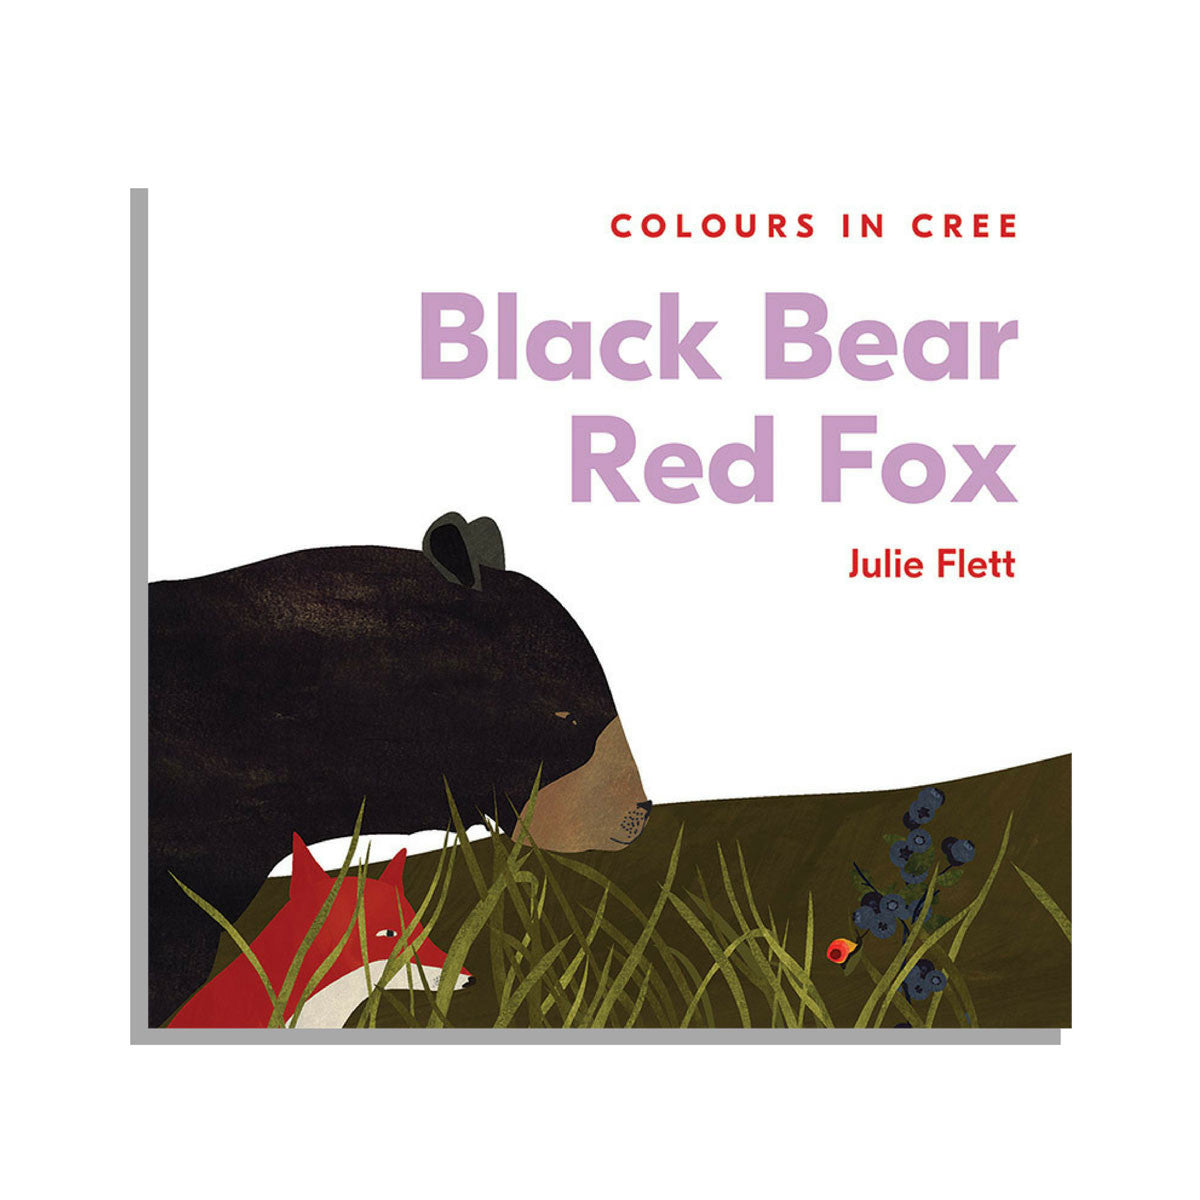 Native Northwest Black Bear Red Fox: Colours in Cree